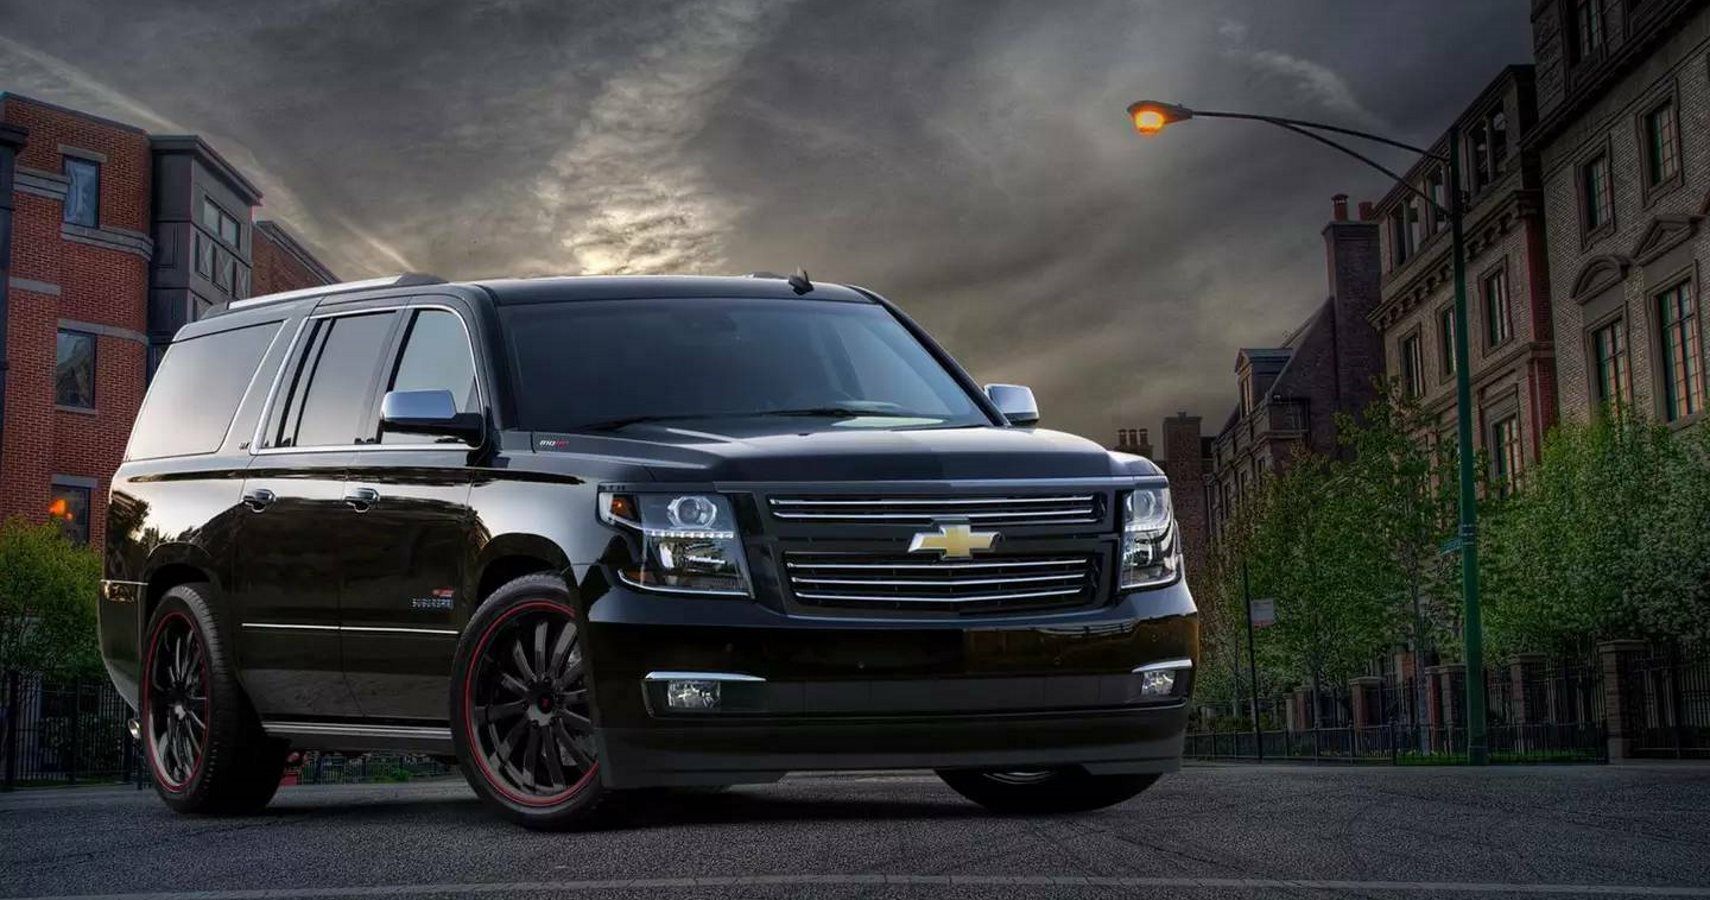 Special Editions Of Chevy Tahoe And Suburban Get Insane 1,000 HP